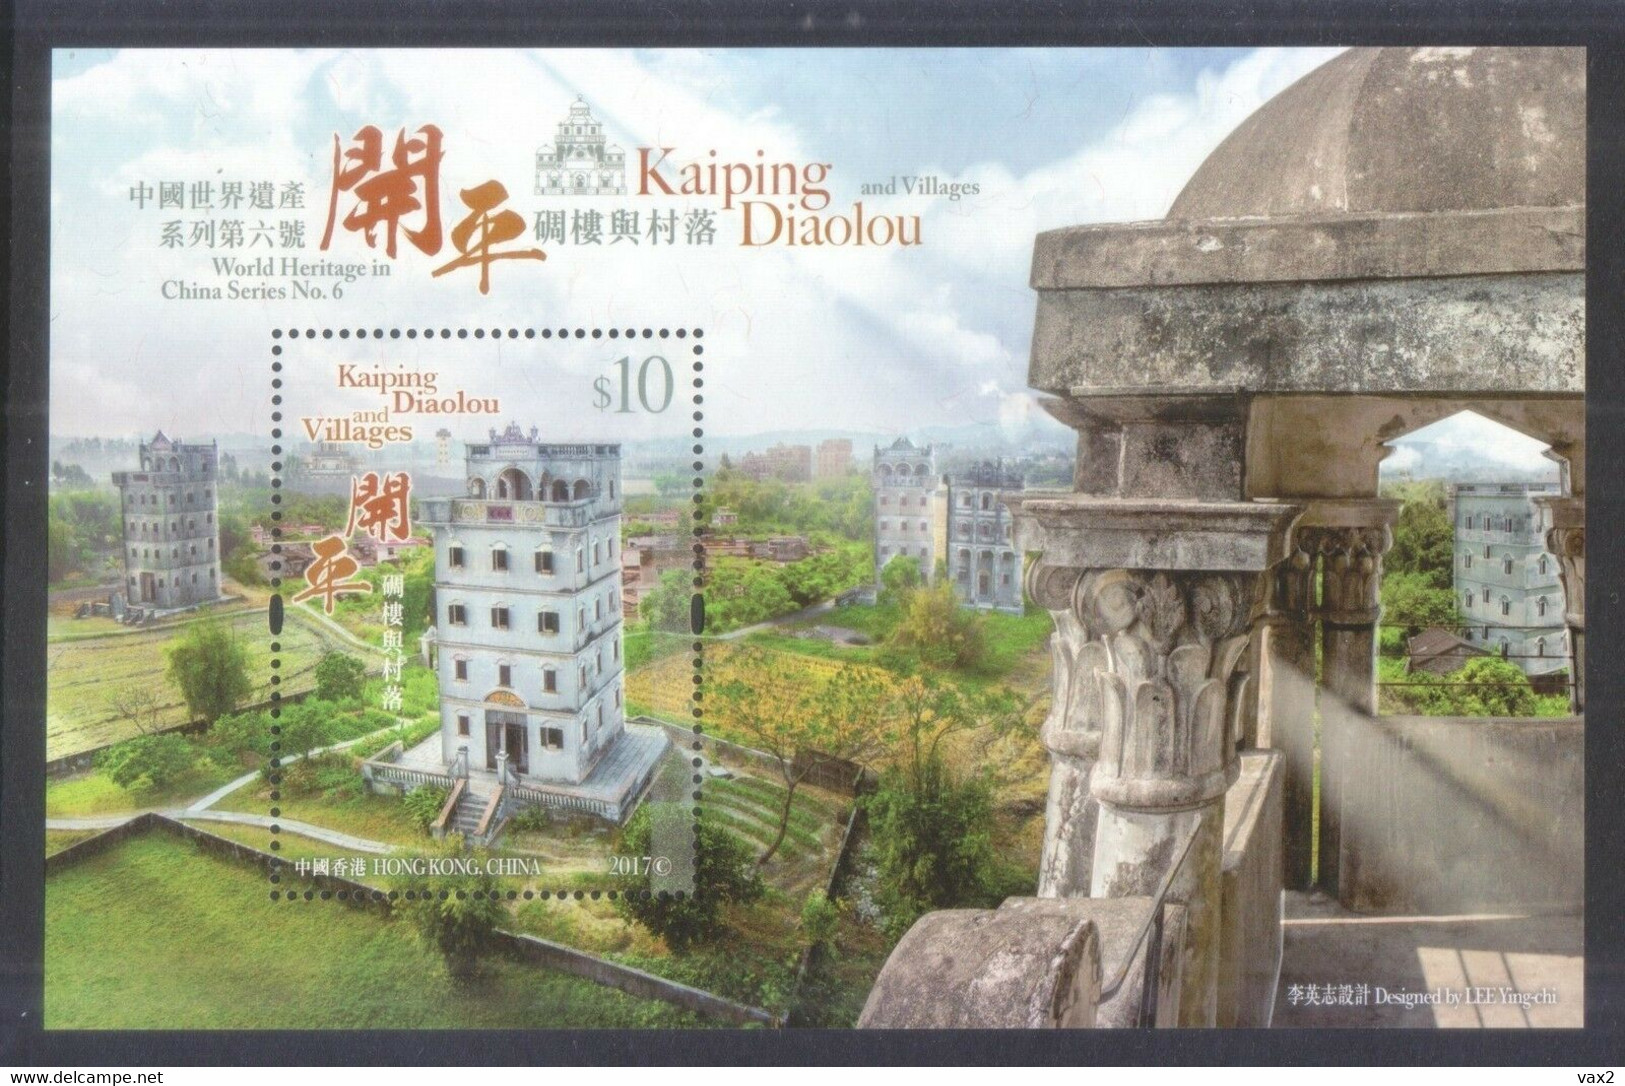 Hong Kong 2017 S#1835 World Heritage In China Series No. 6: Kaiping Diaolou & Villages M/S MNH UNESCO Unusual (embossed) - Unused Stamps